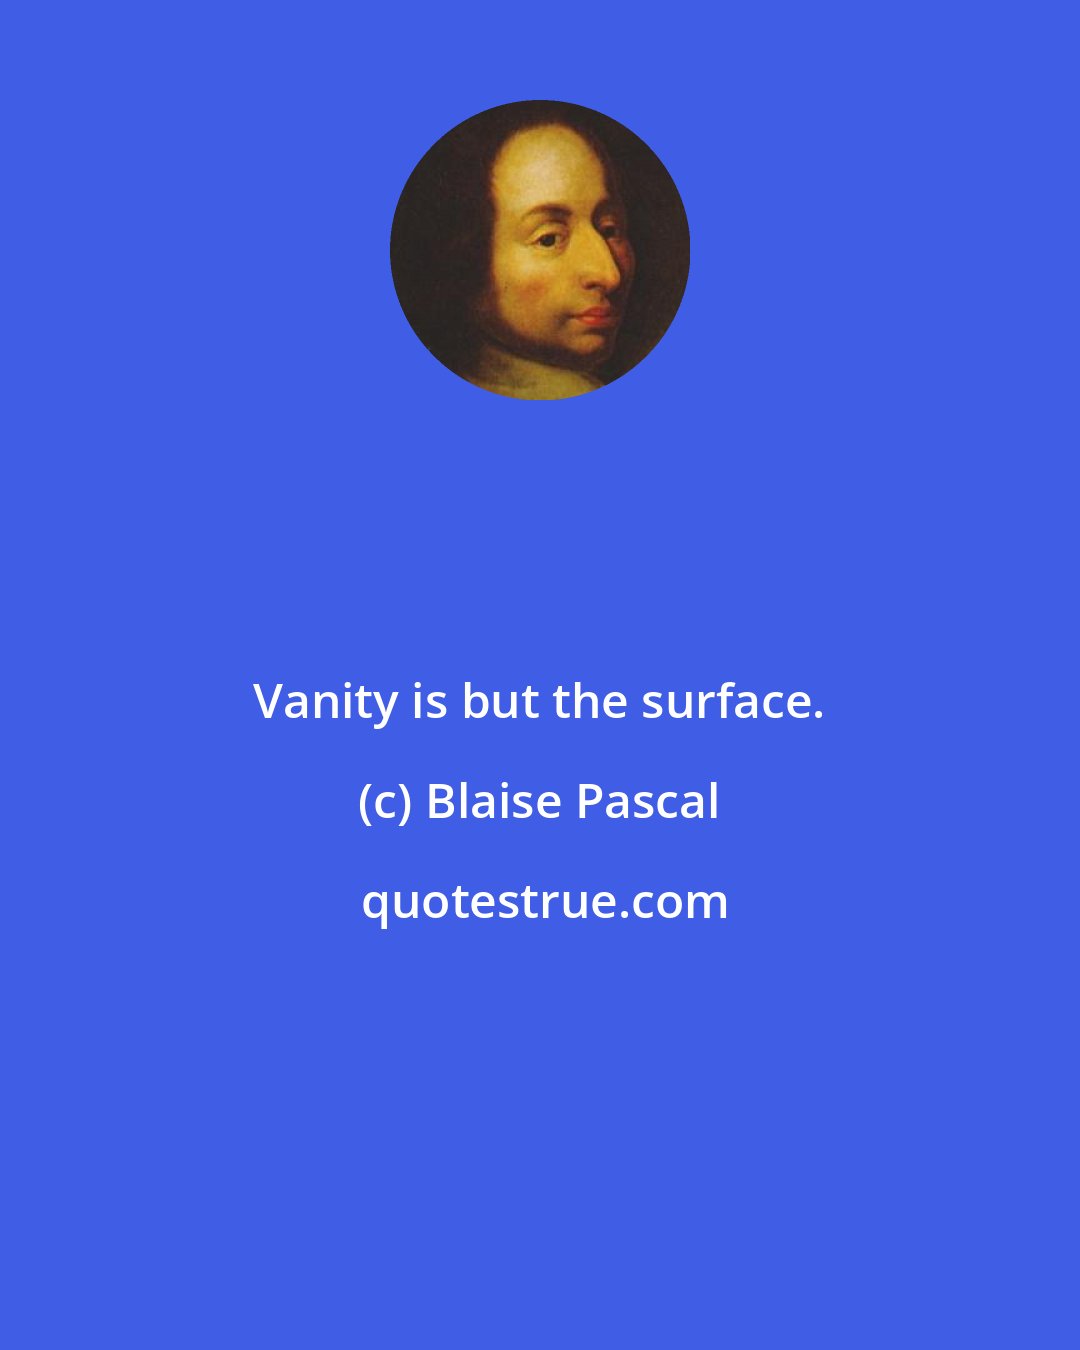 Blaise Pascal: Vanity is but the surface.